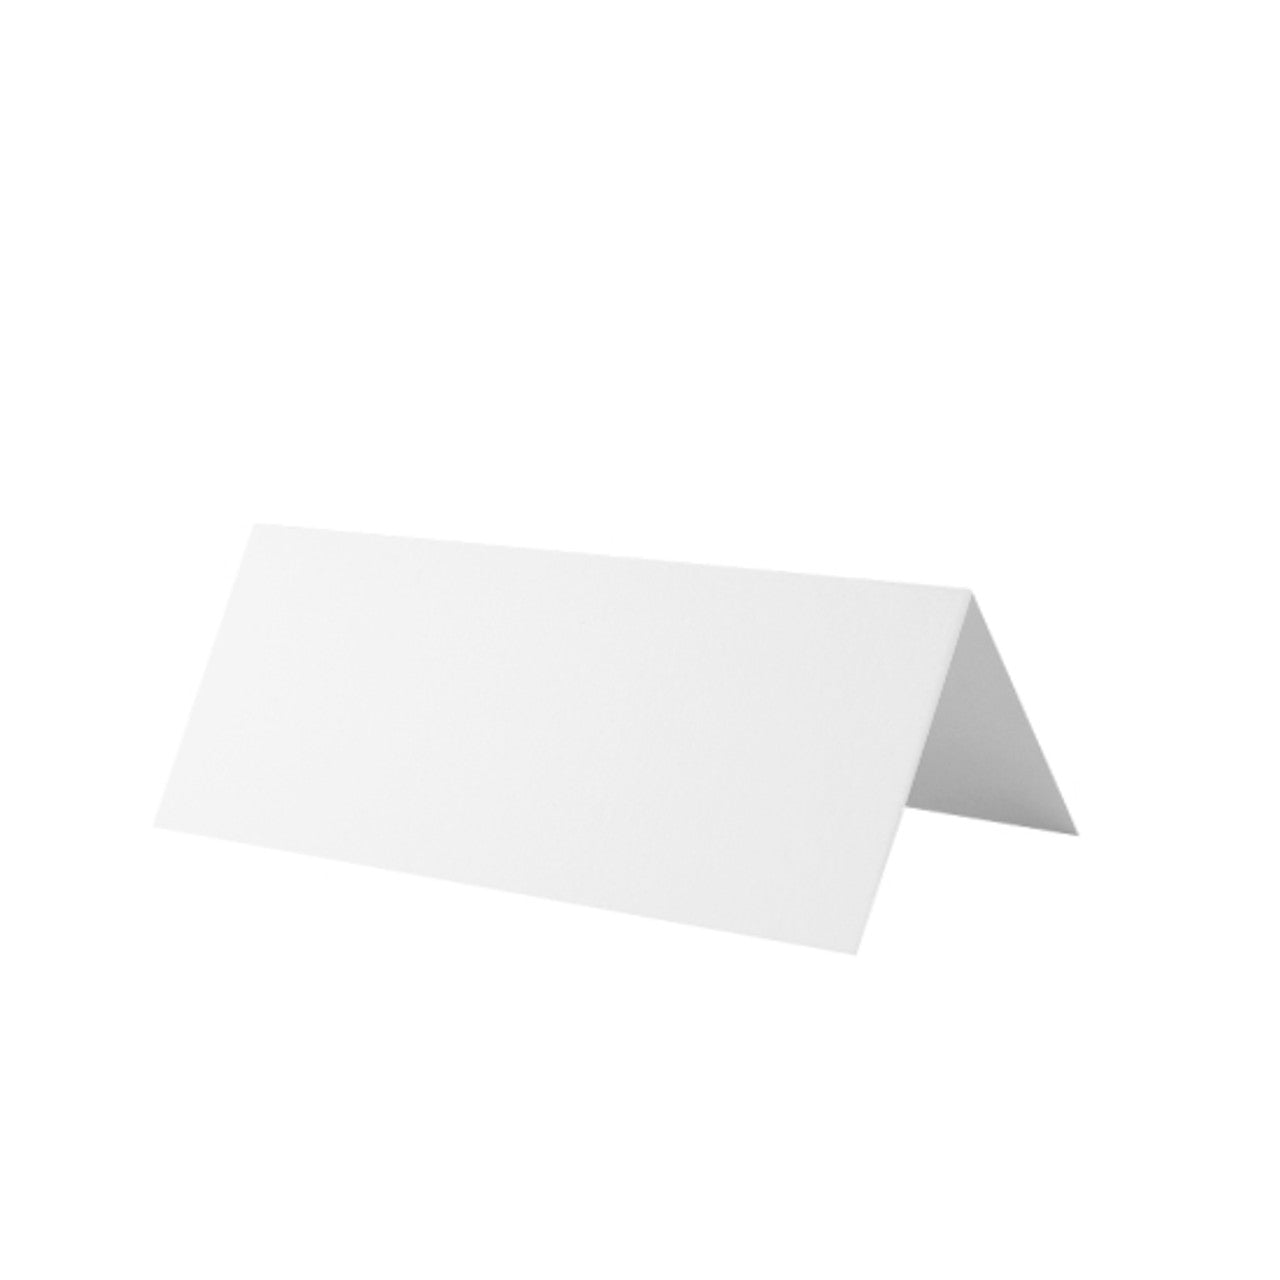 White place cards set of 10